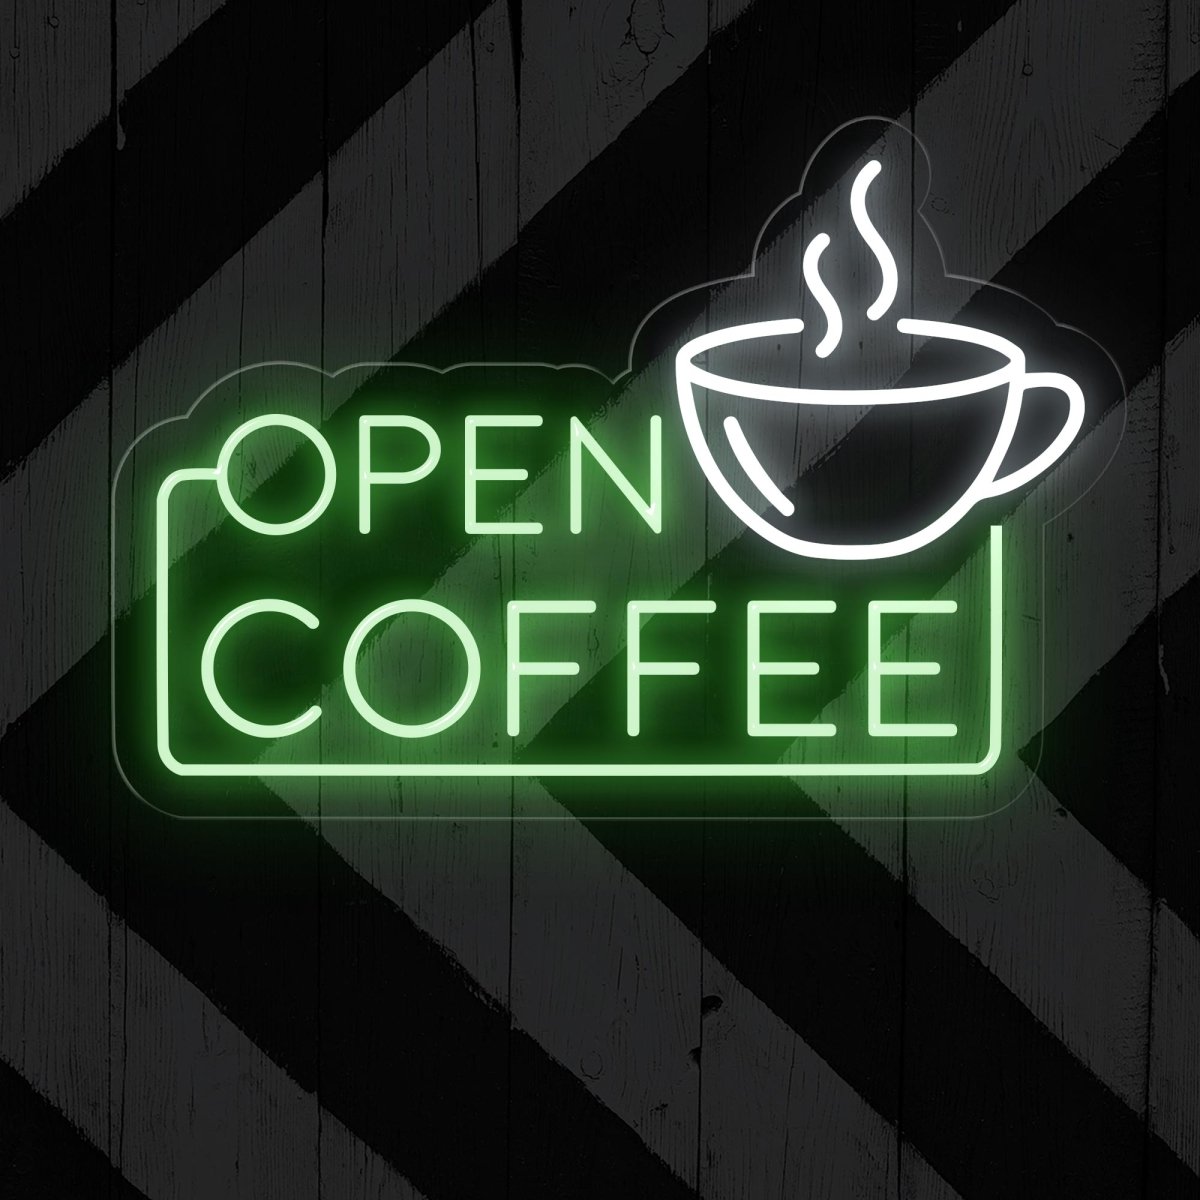 Light Up Open Coffee Sign for Coffee Shop | Warm Coffee Ambiance - NEONXPERT